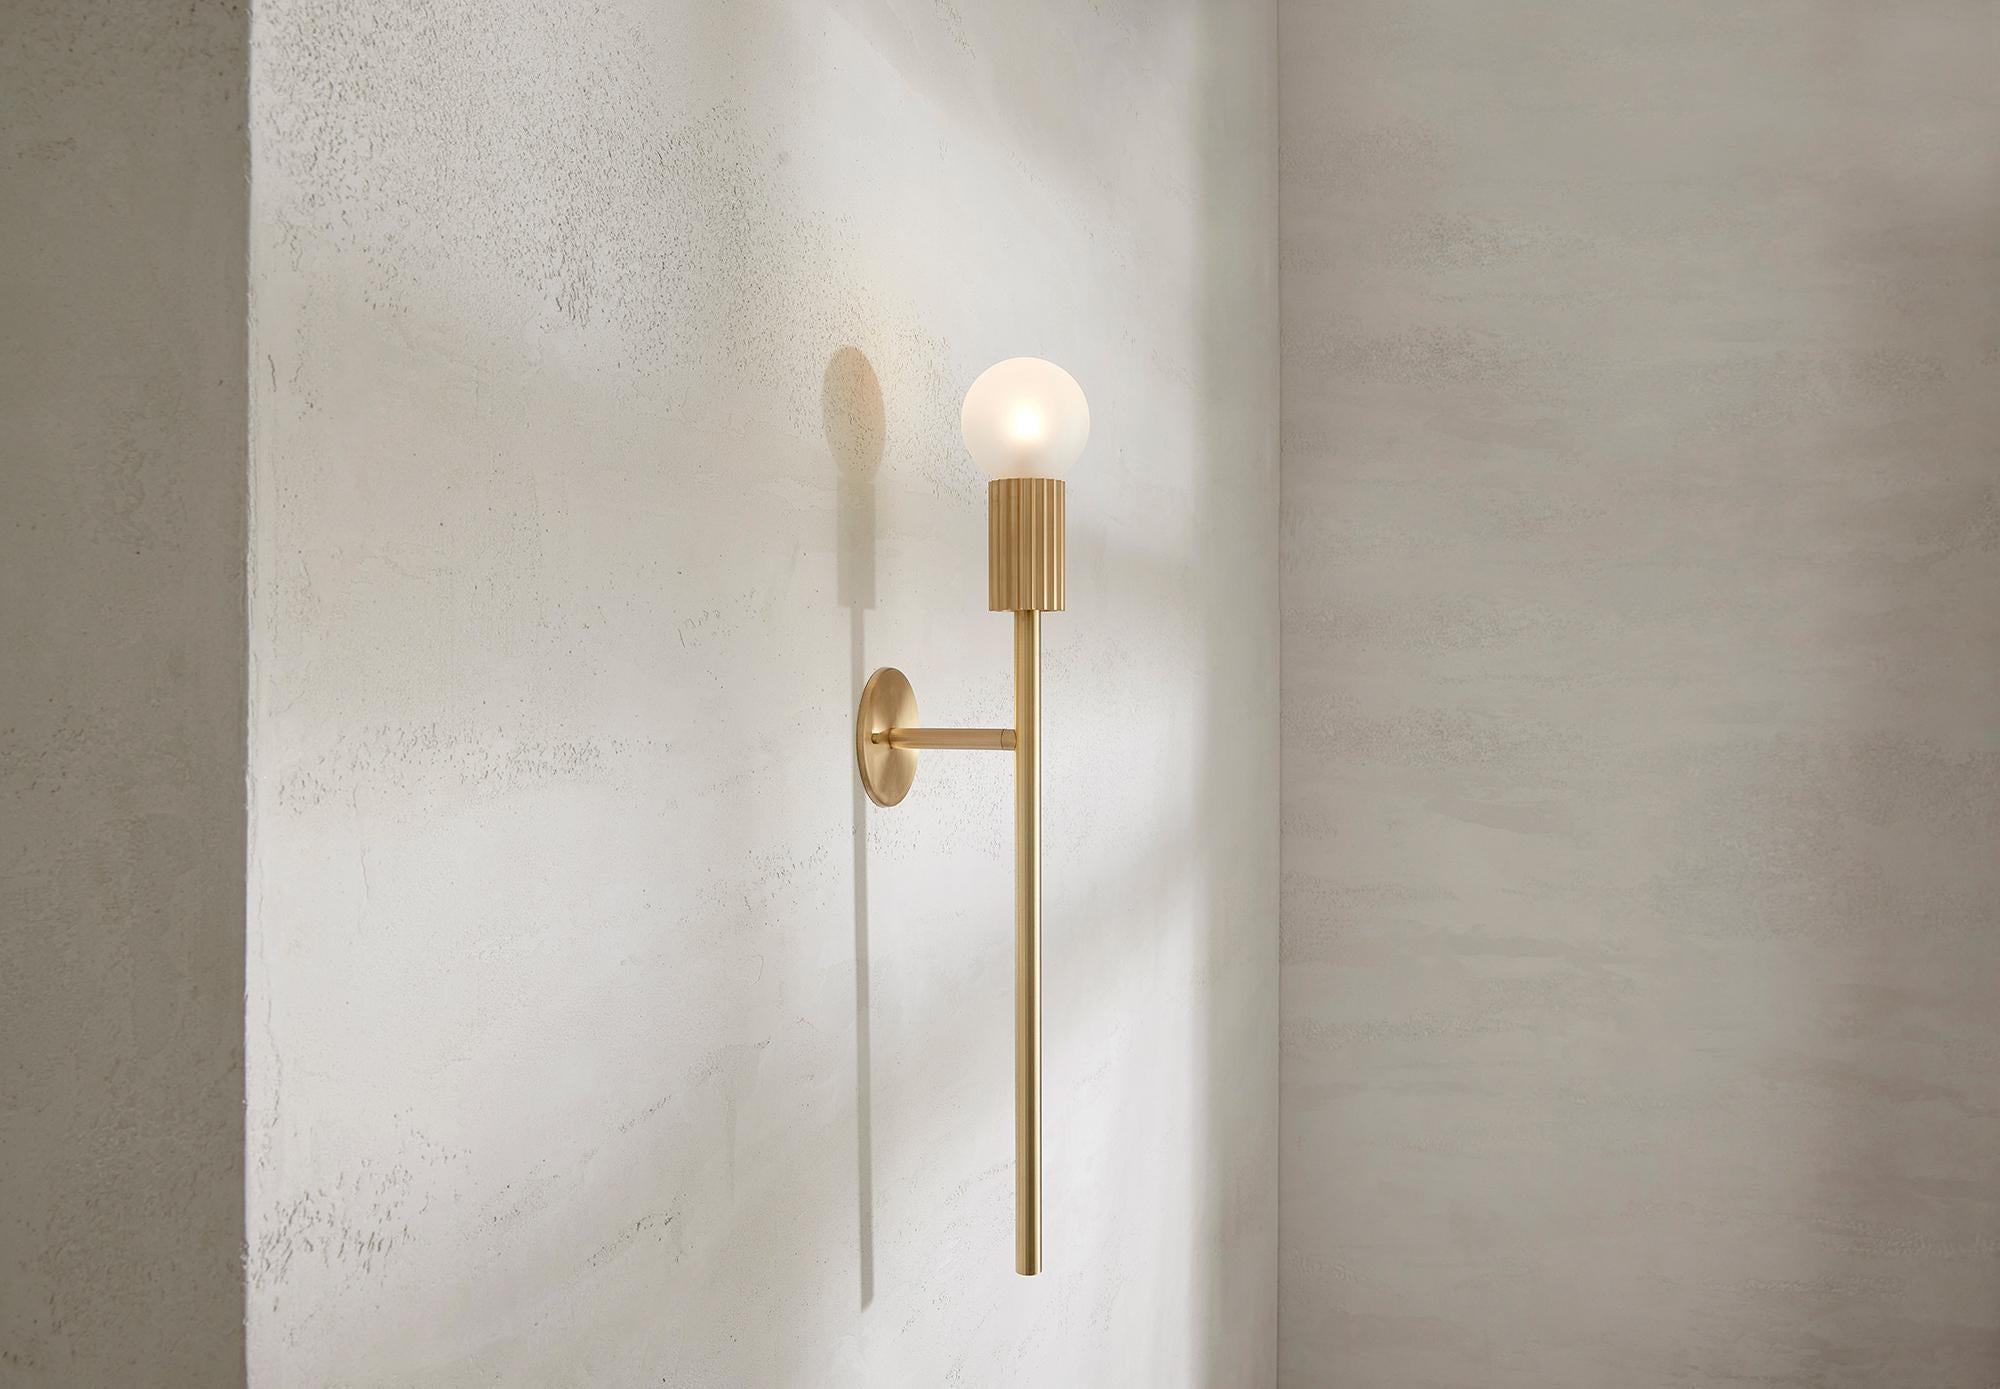 The Attalos Wall Light, 95 is a new addition to the current Attalos range and retains its classical sculptural aesthetic echoing ancient Greek architectural forms. Incorporating an LED frosted globe counterbalanced on a base and post machined from